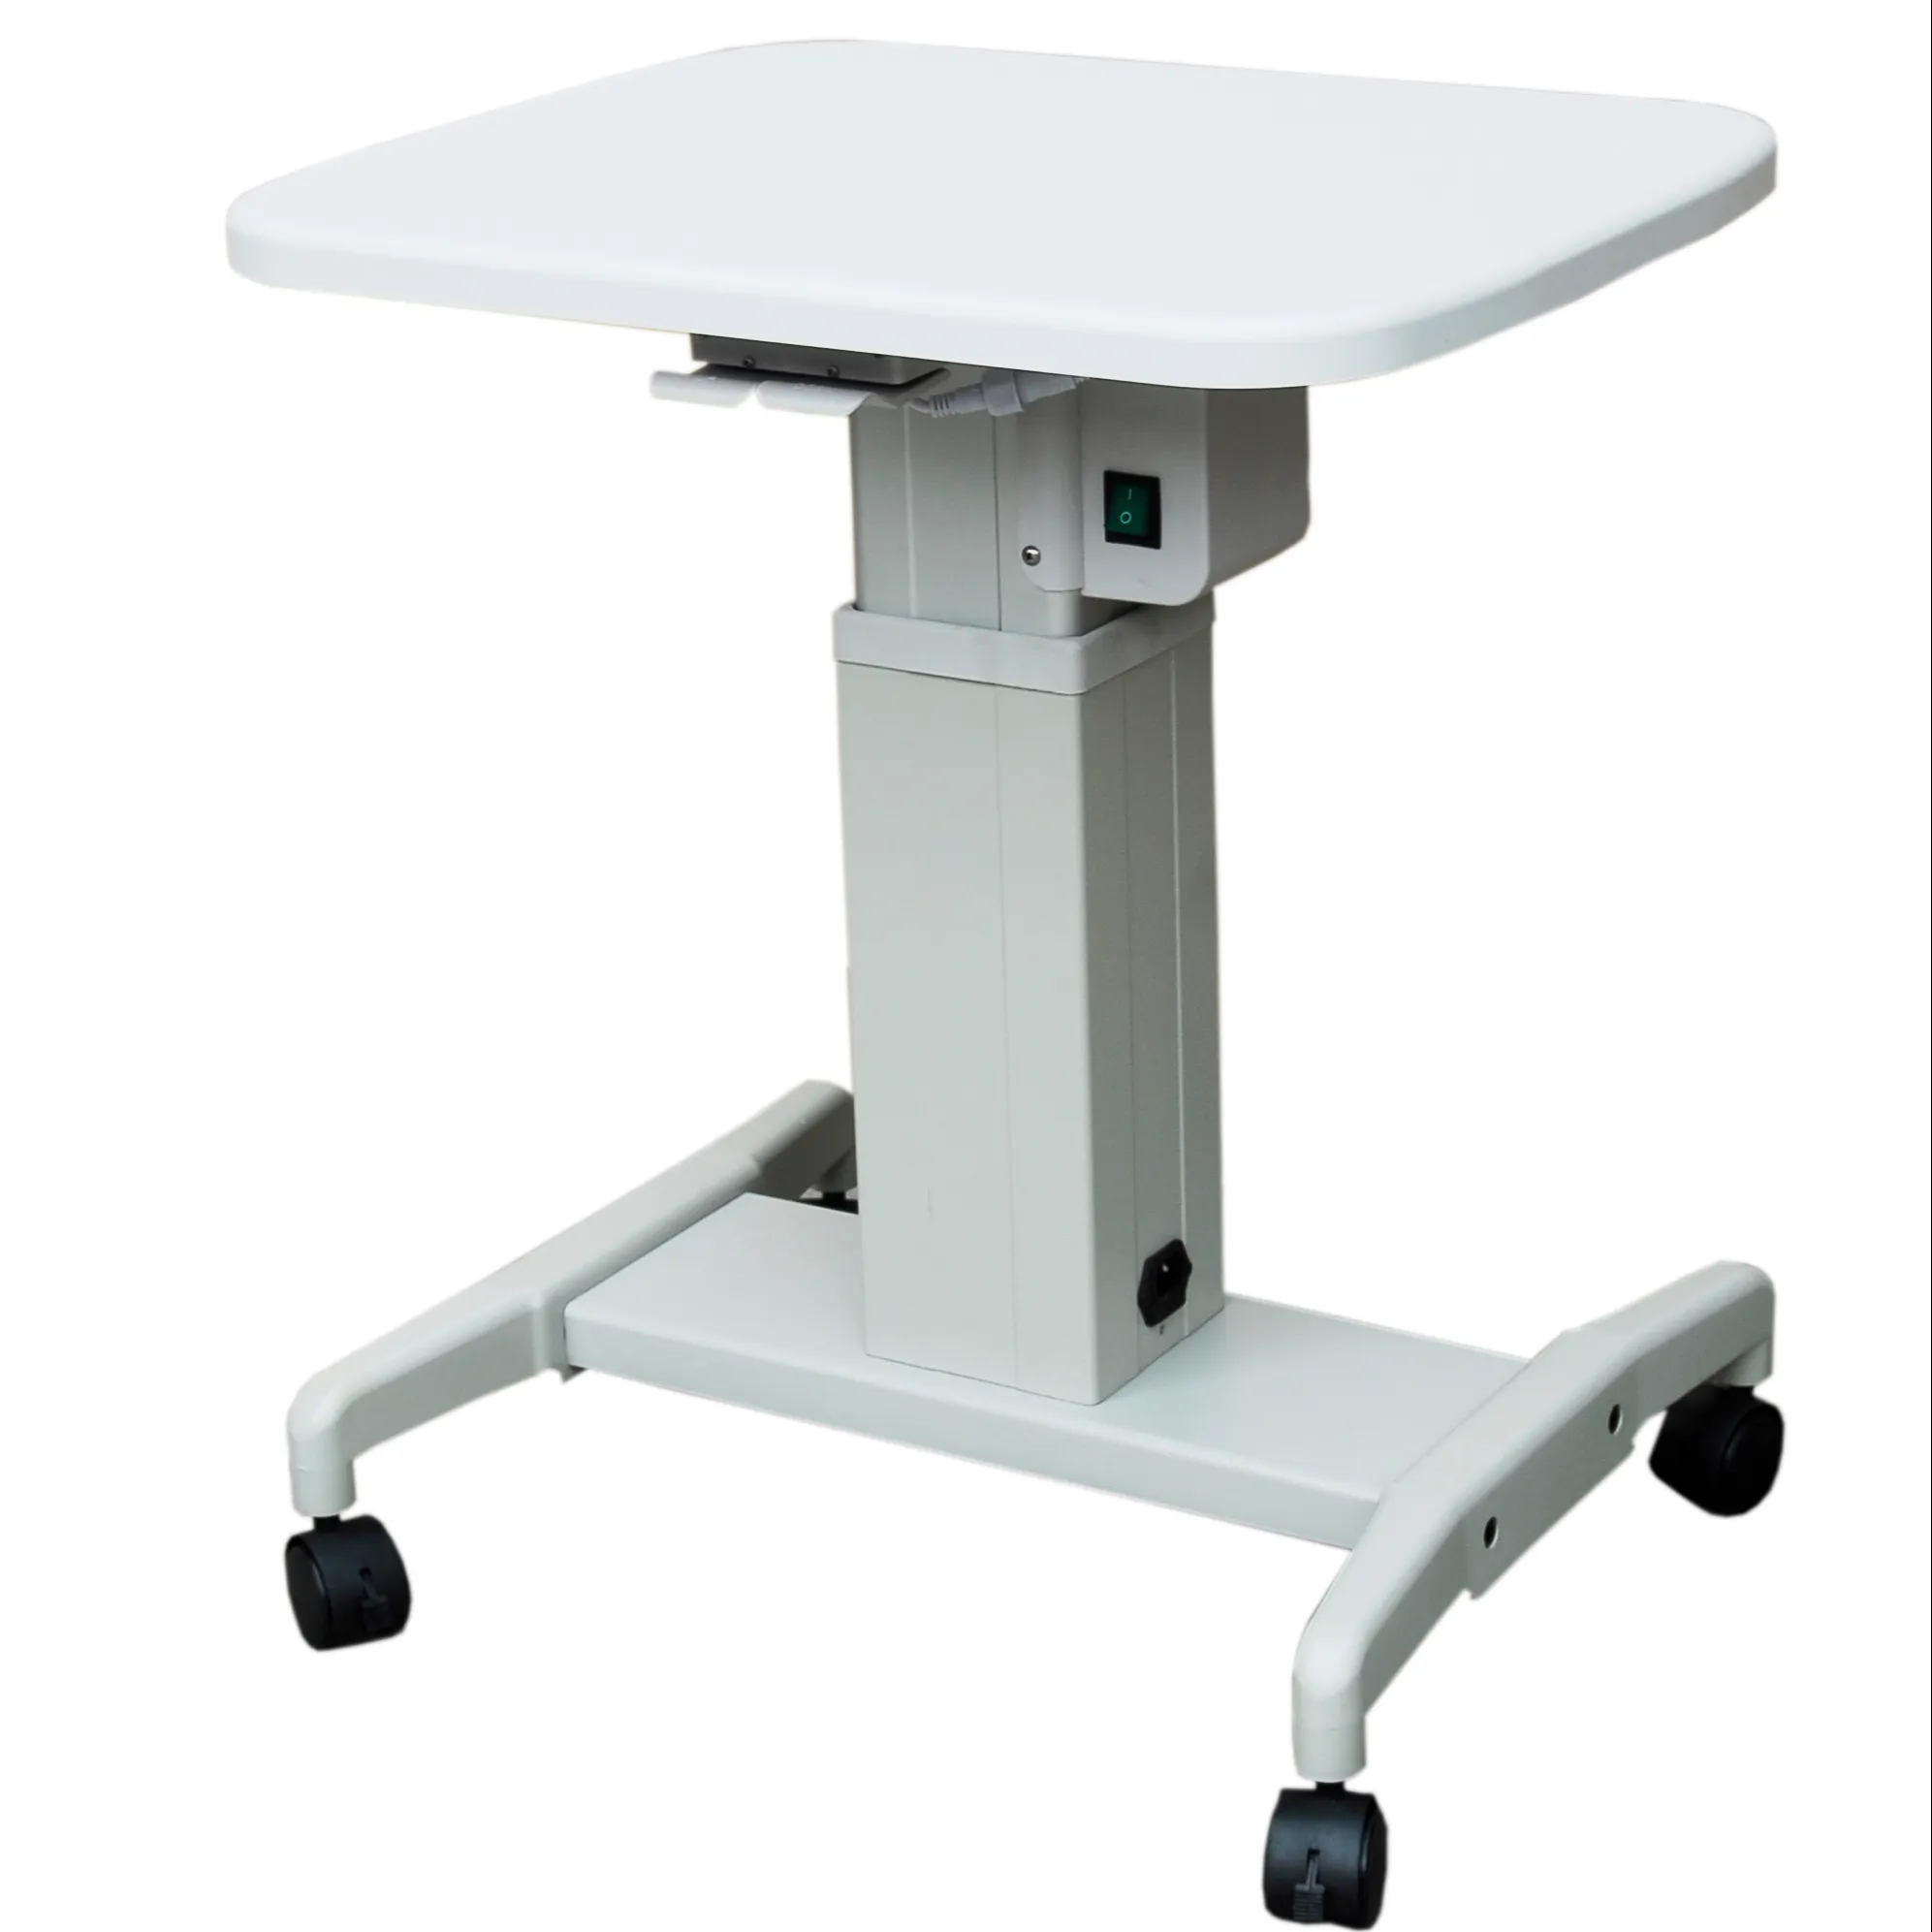 Professional Hospital Use Instrument Table TB-S100 58cm*47cm Adjustable Height with Motorized Adjustment Easy to Move